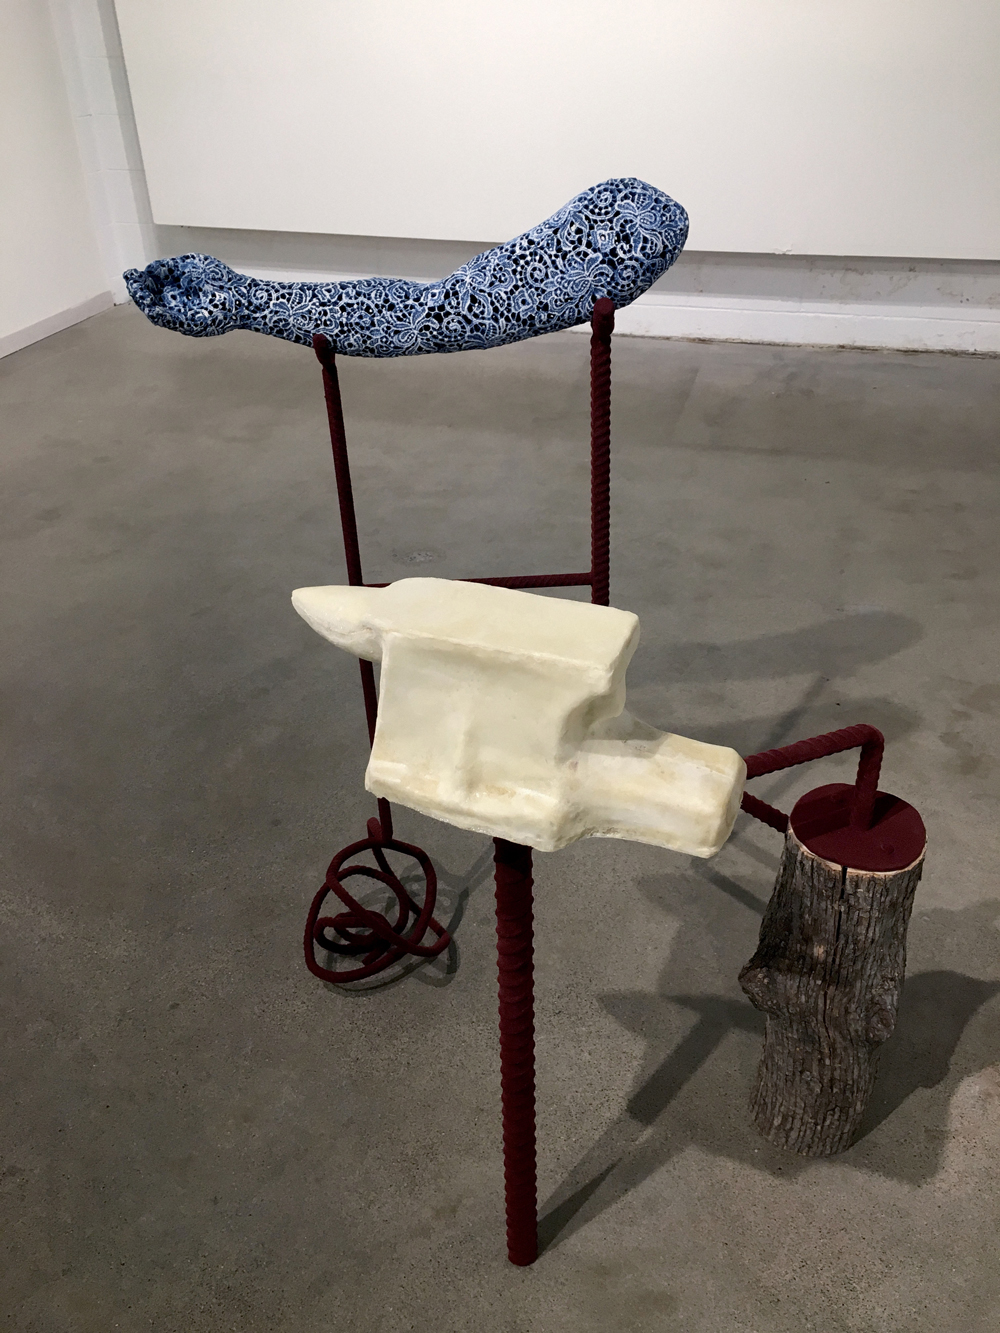 Betsy Alwin and Shana Kaplow Uncertain Structures, The Small Parts